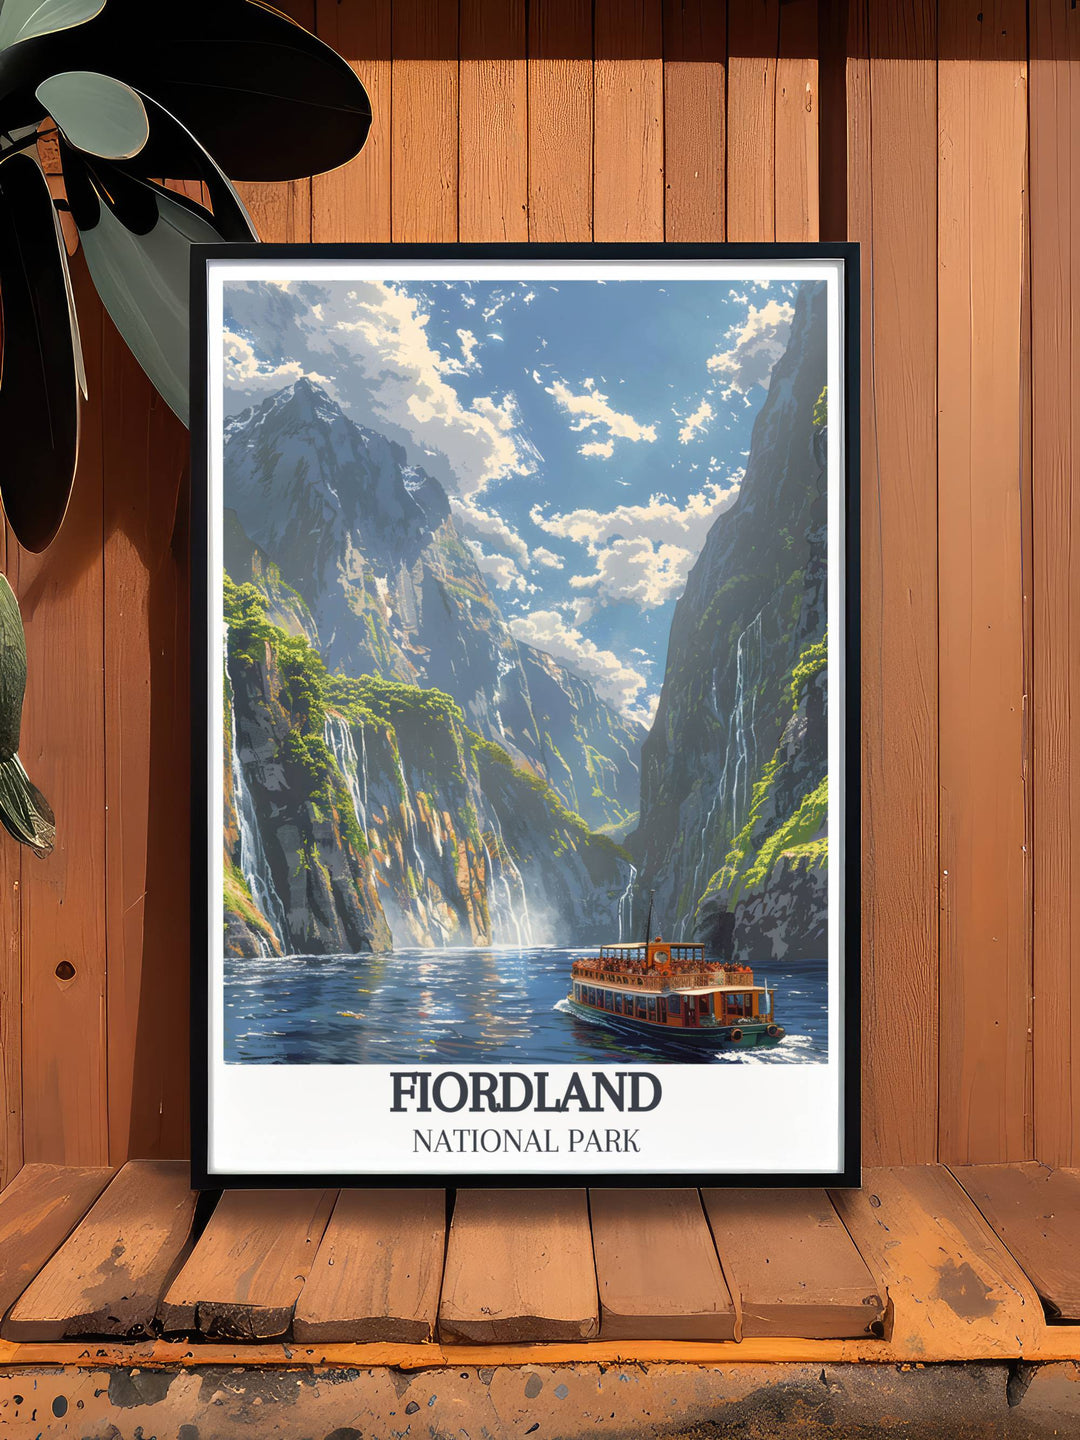 A close up view of the cascading waterfalls in Milford Sound during the rainy season, highlighted in this vividly detailed poster.